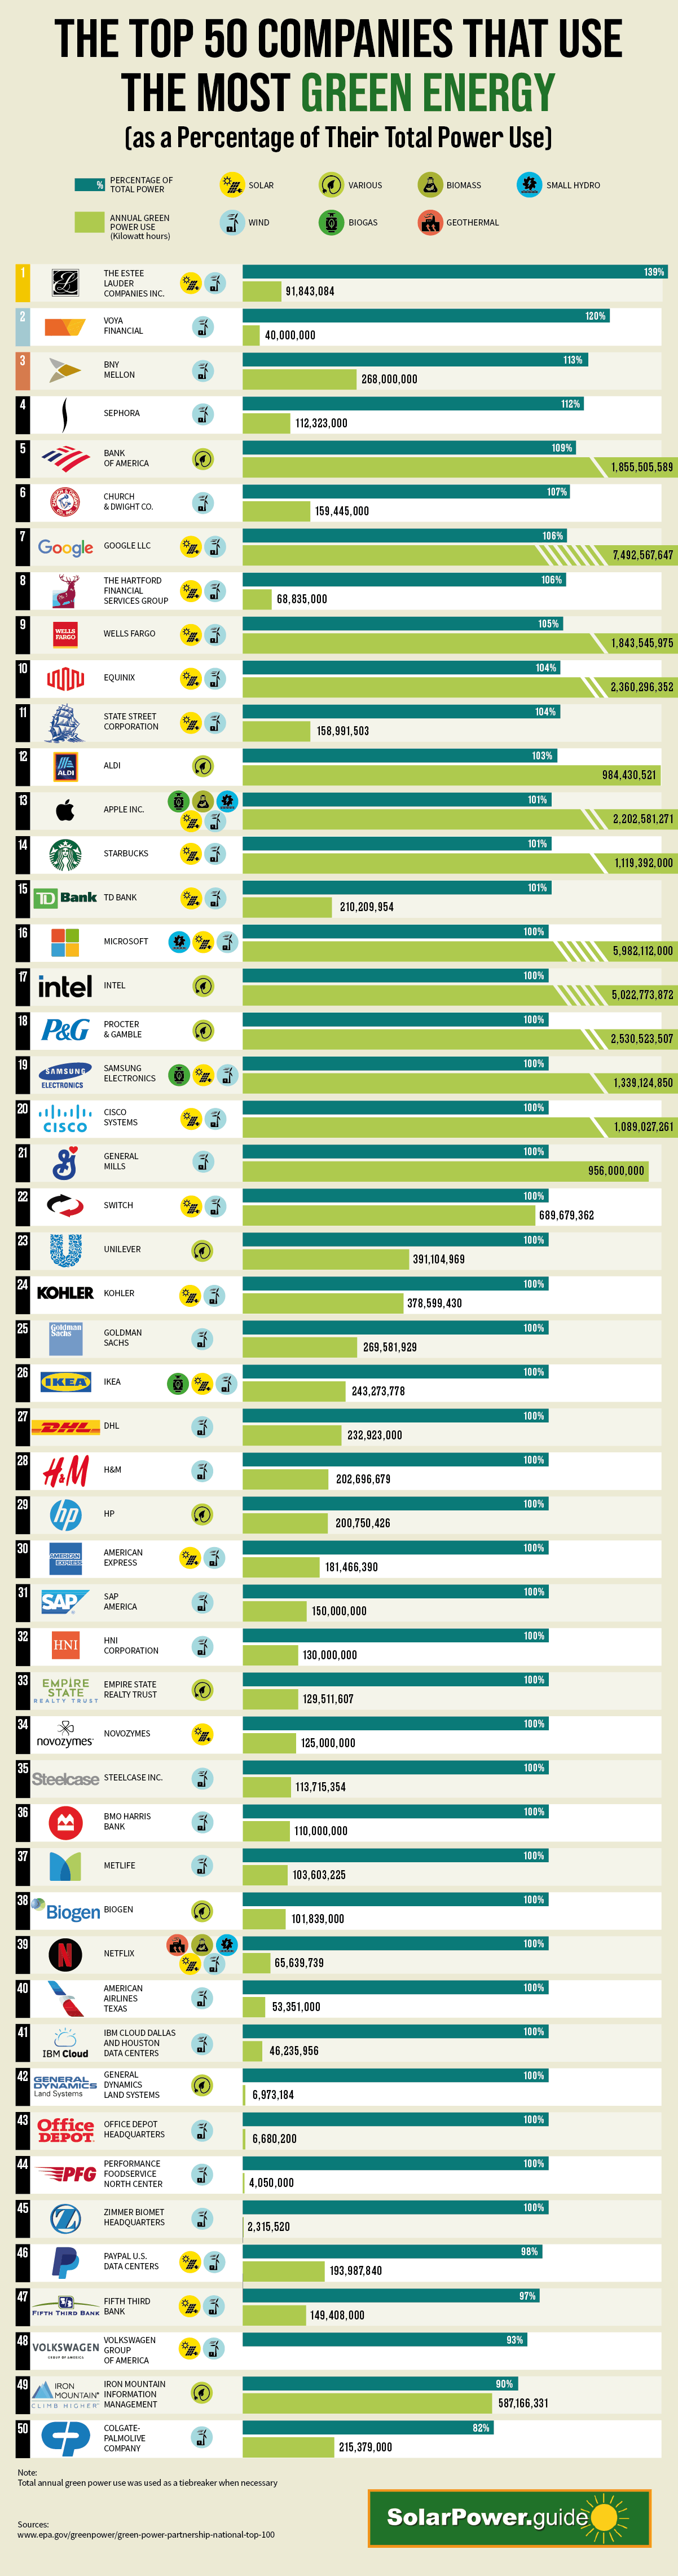 50 companies ranked by their green energy use